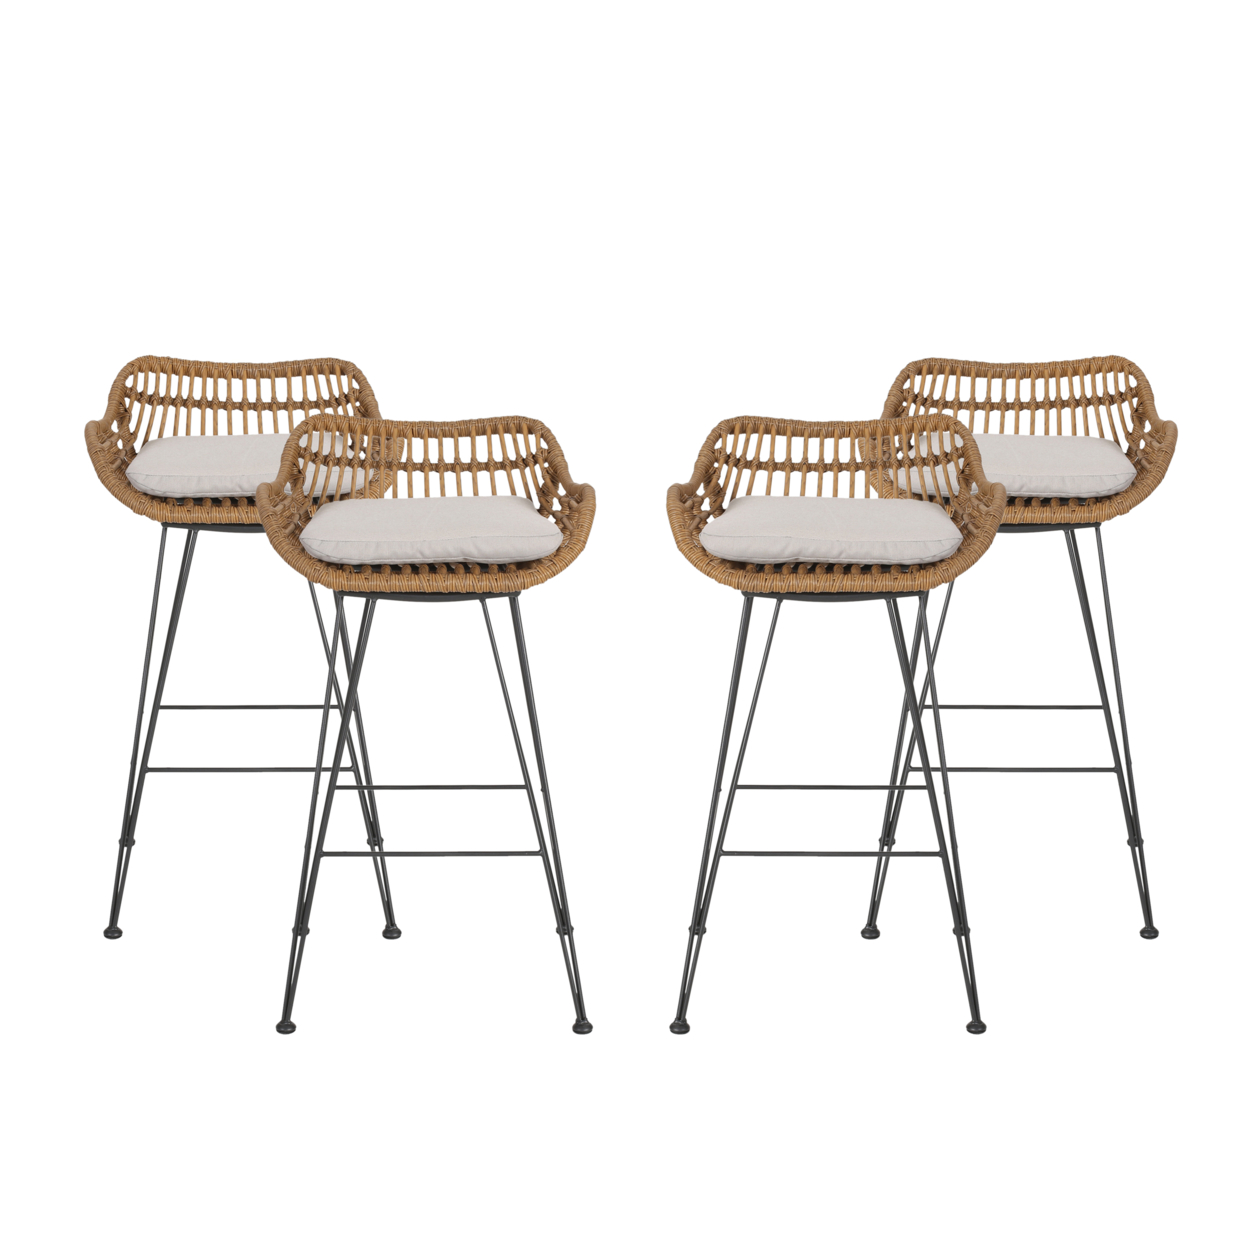 Candance Outdoor Wicker Barstools With Cushions (Set Of 4) - Light Brown, Black, Beige